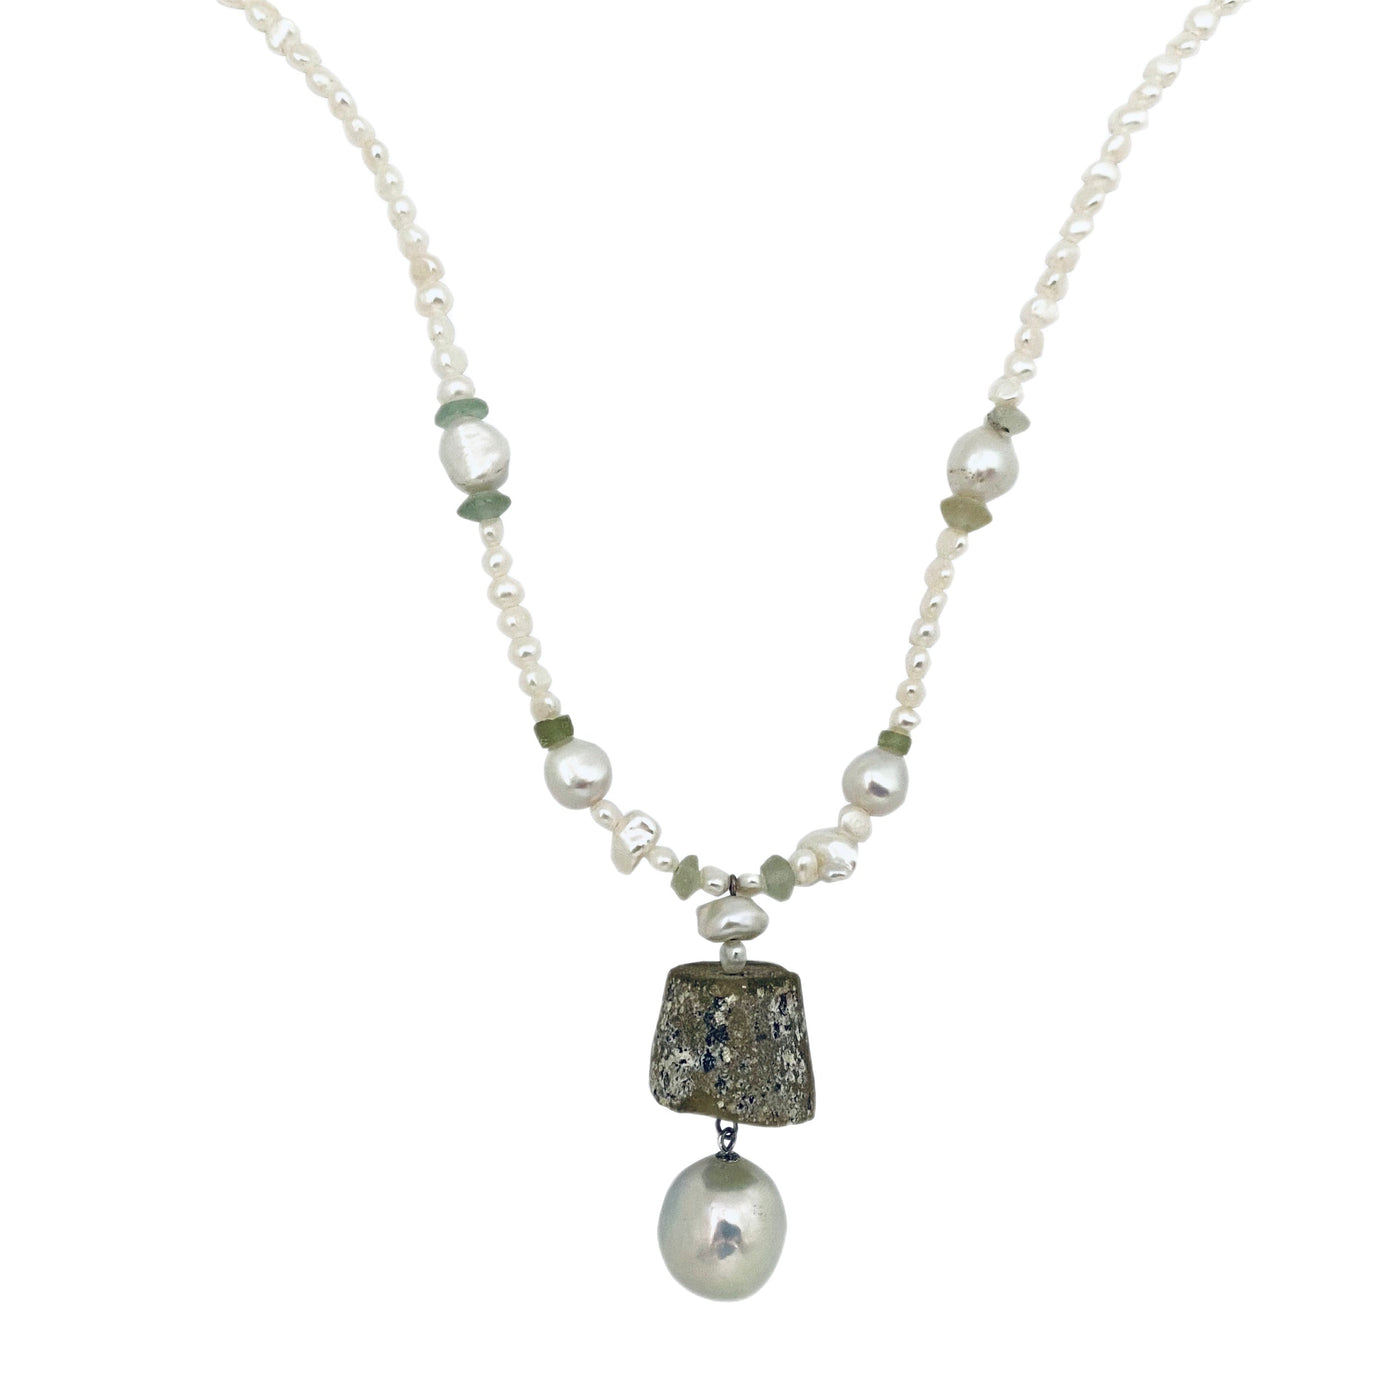 Antique Glass & Pearl Necklace | The Courthouse Collection